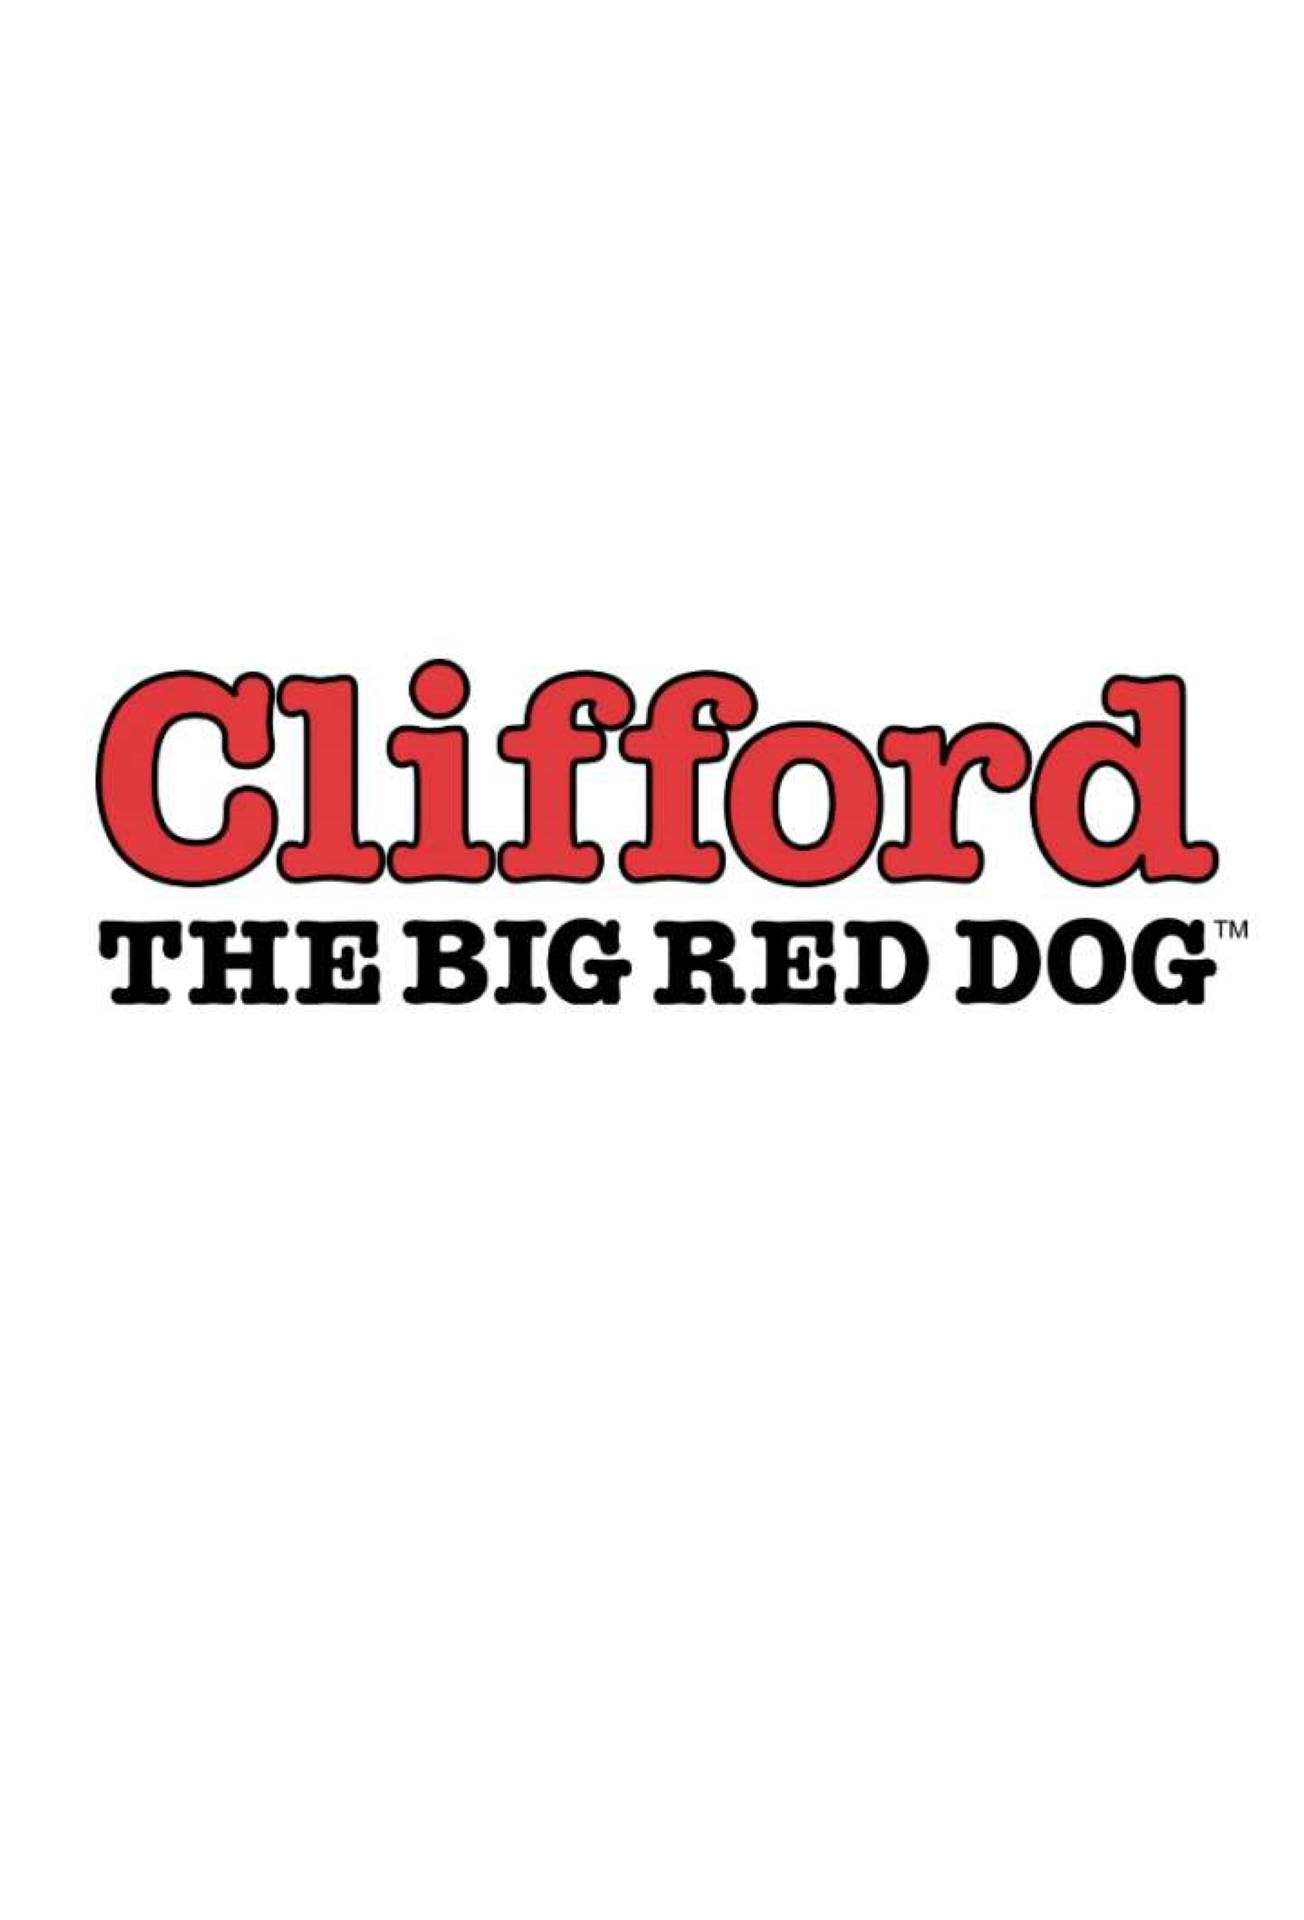 Clifford The Big Red Dog Logo Background